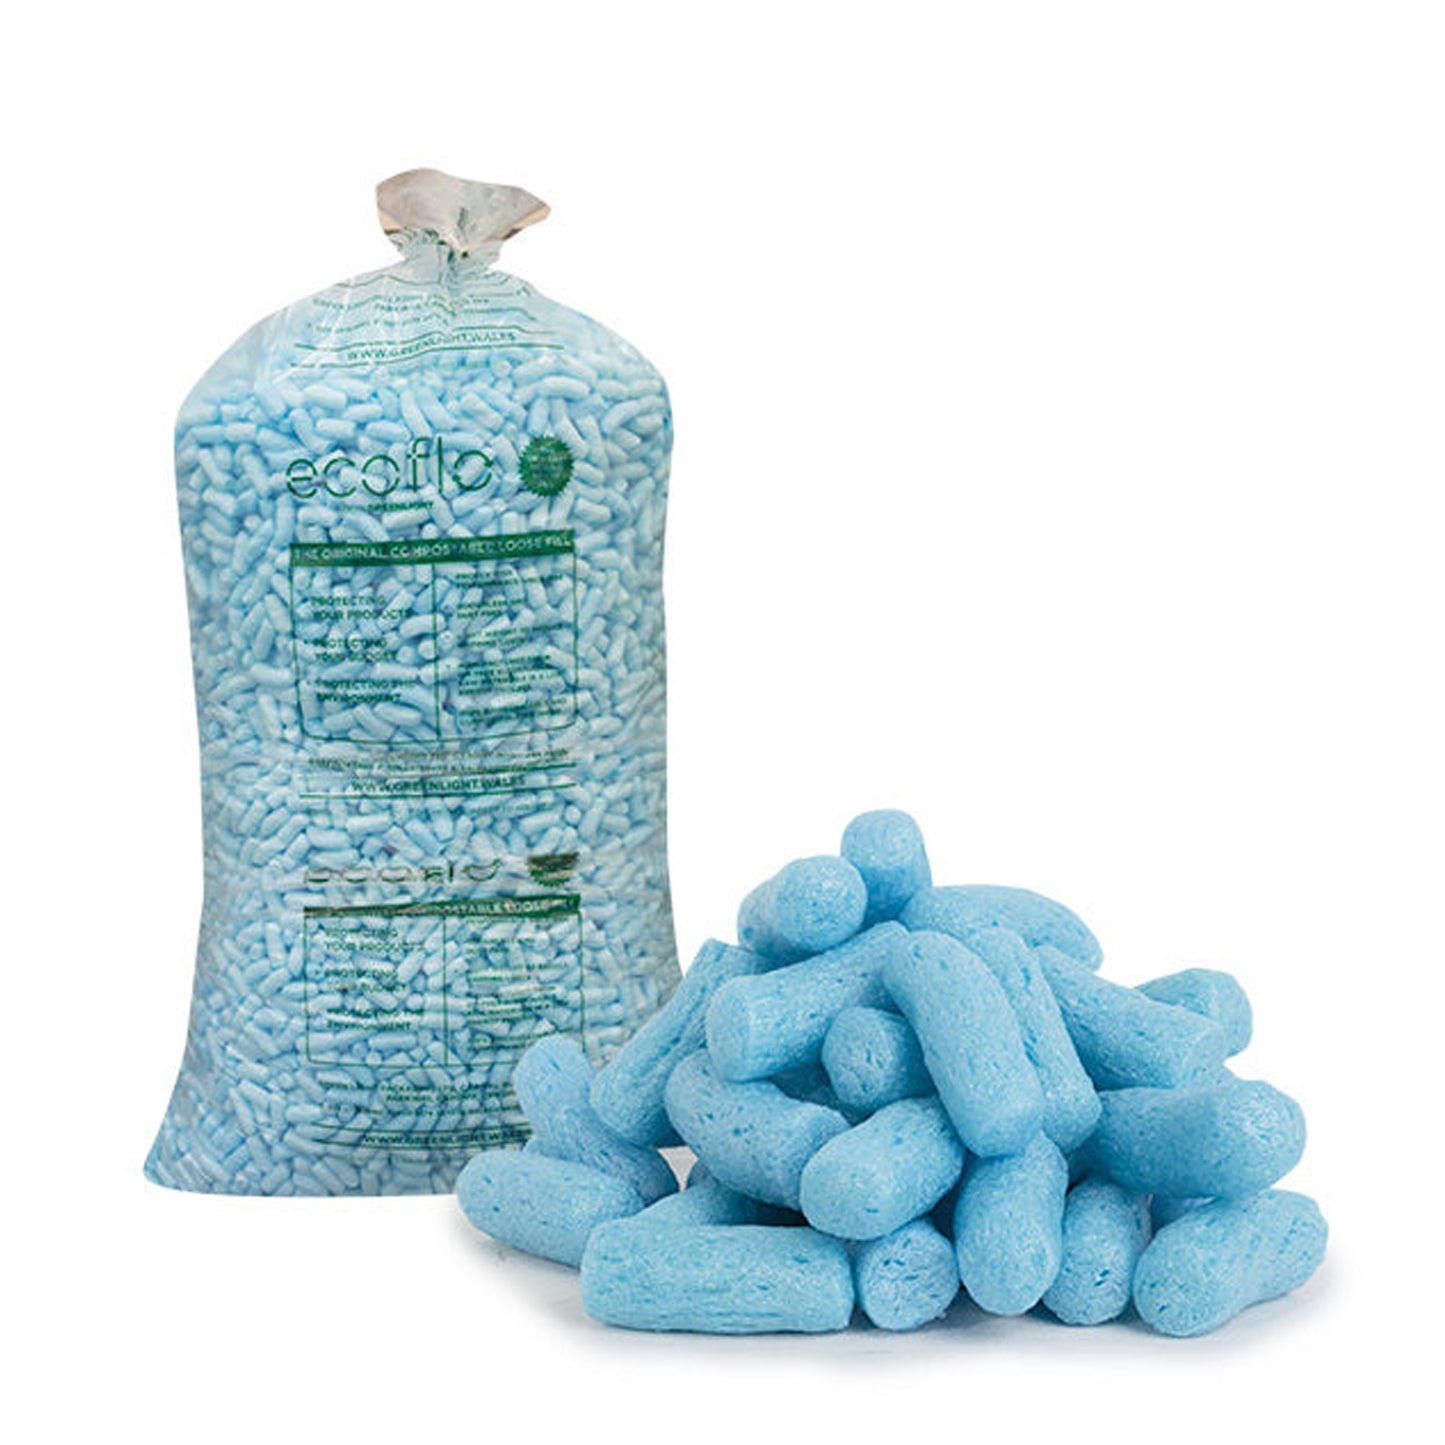 Eco Flo Biodegradable Packing Peanuts Loose Fill